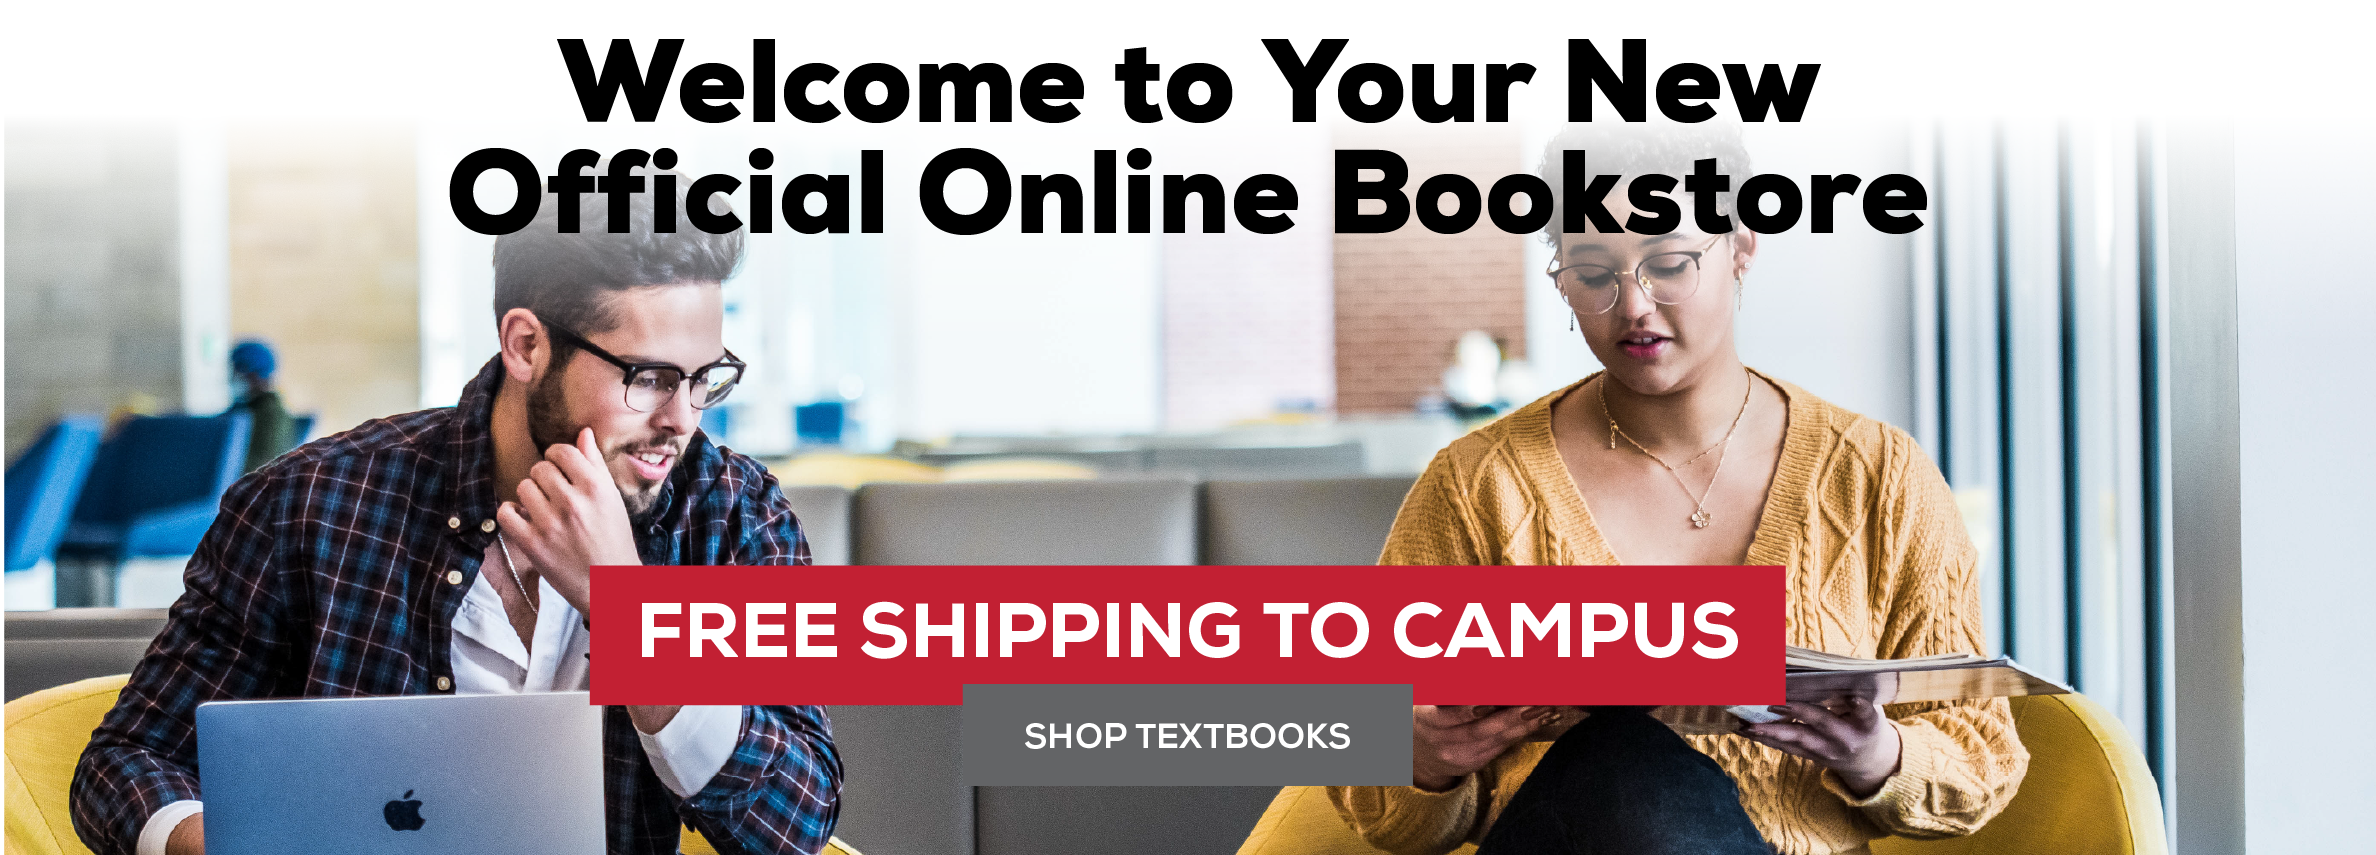 Welcome to your official online bookstore! Free shipping to campus! Shop Textbooks